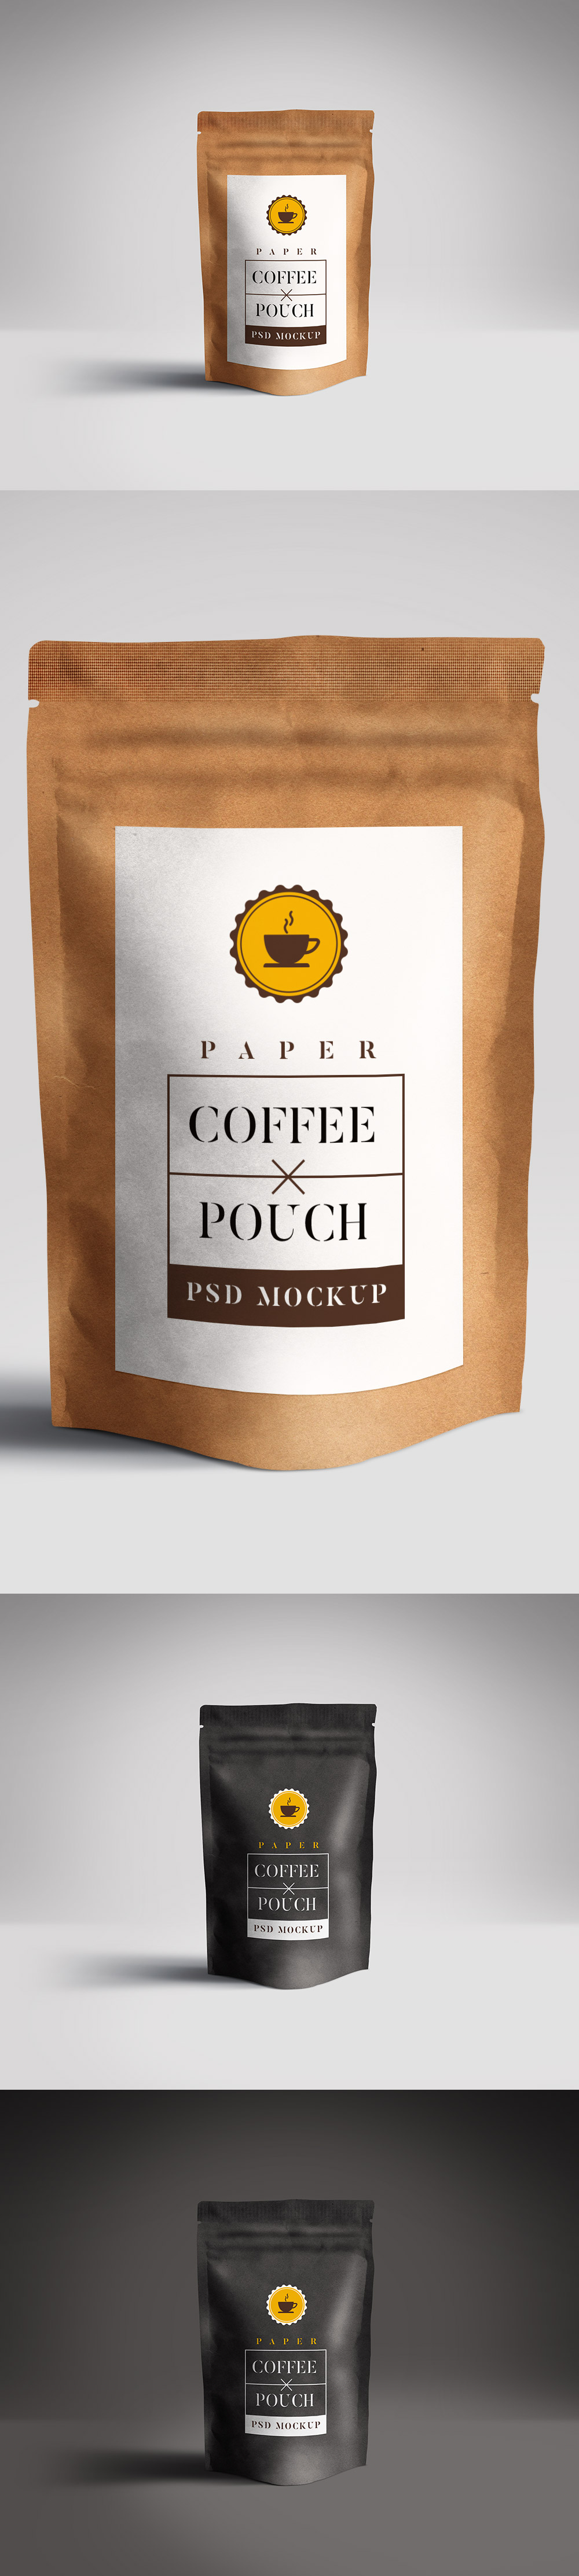 Paper Pouch Mockup PSD